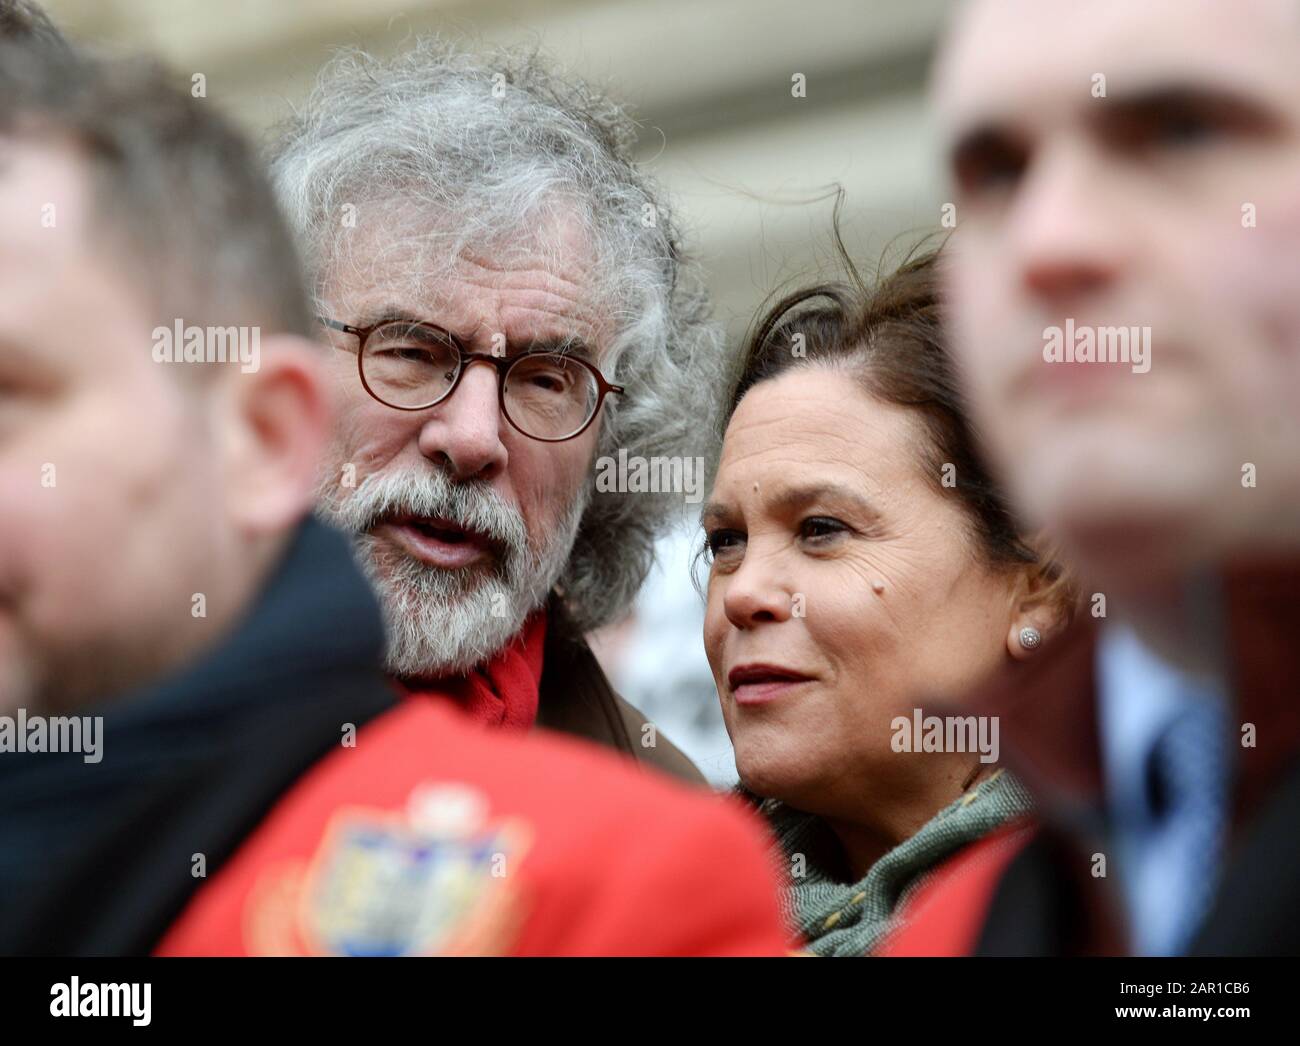 Sinn Fein leader Mary Lou McDonald and former leader Gerry Adams during a rally in Drogheda, Co. Louth, to voice opposition to drug-related violence in the town. Stock Photo